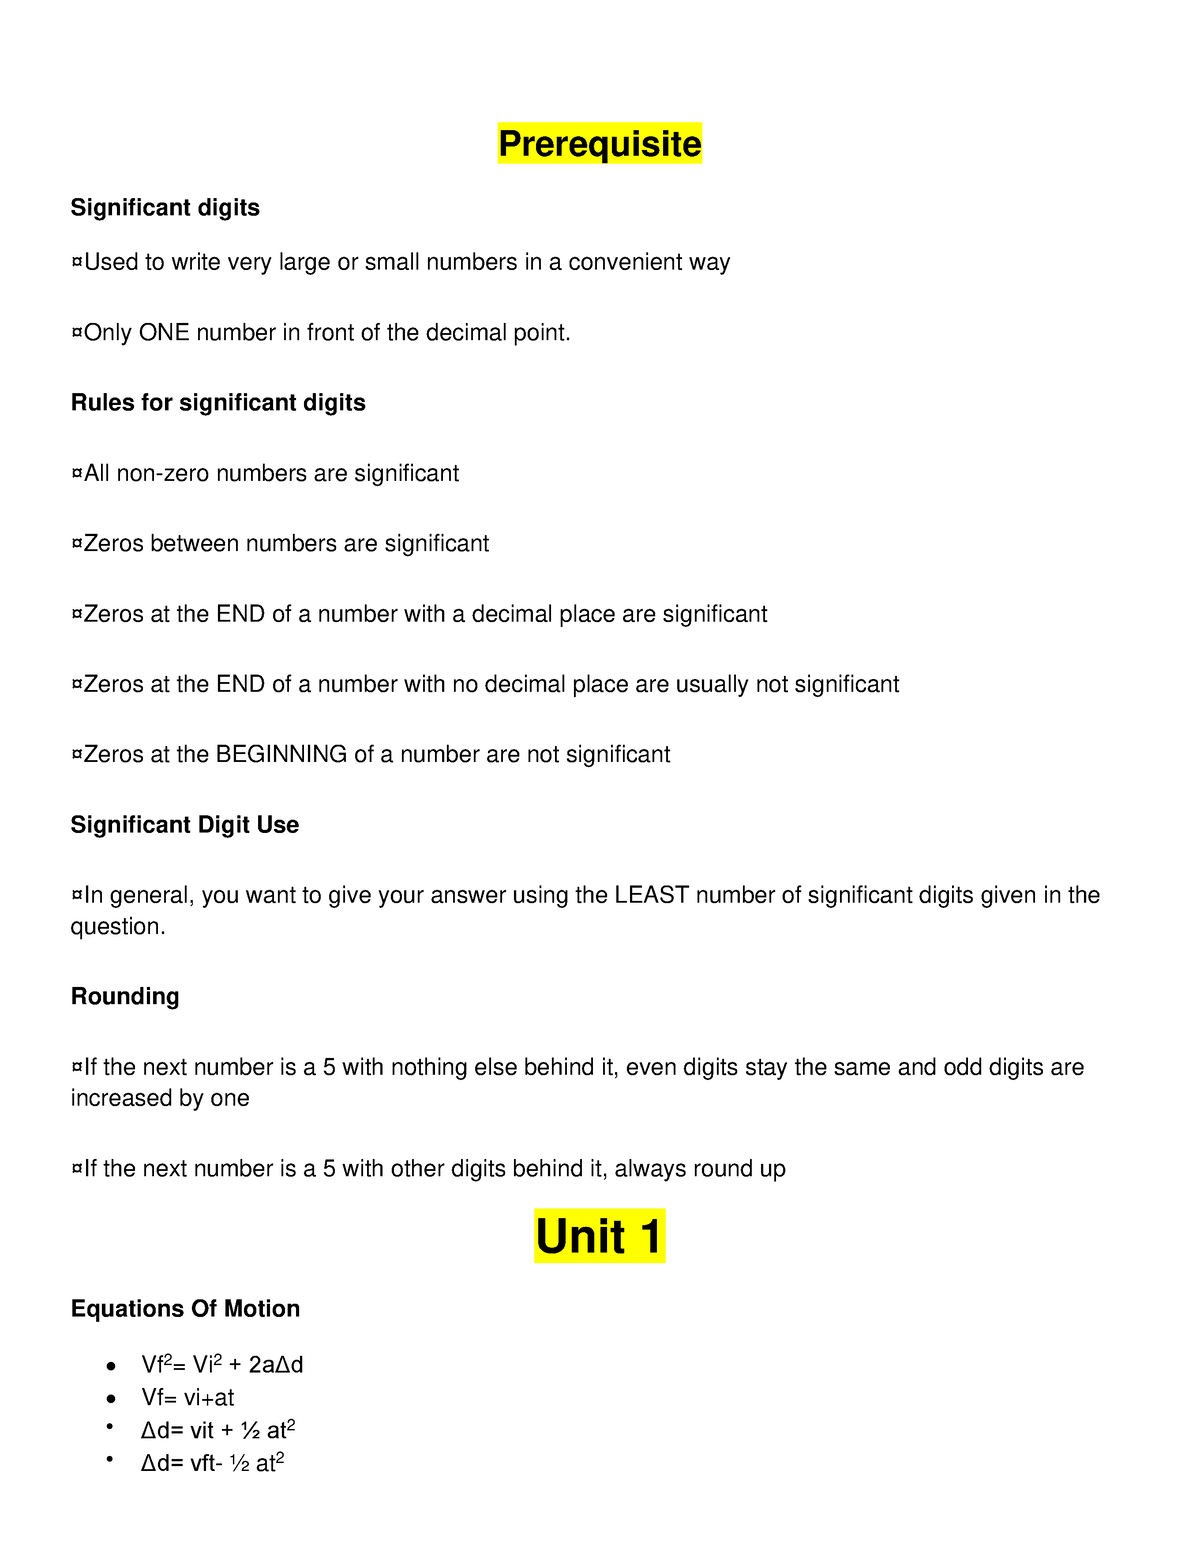 SPH4U Unit 1 Summary Prerequisite Significant Digits Used To Write 